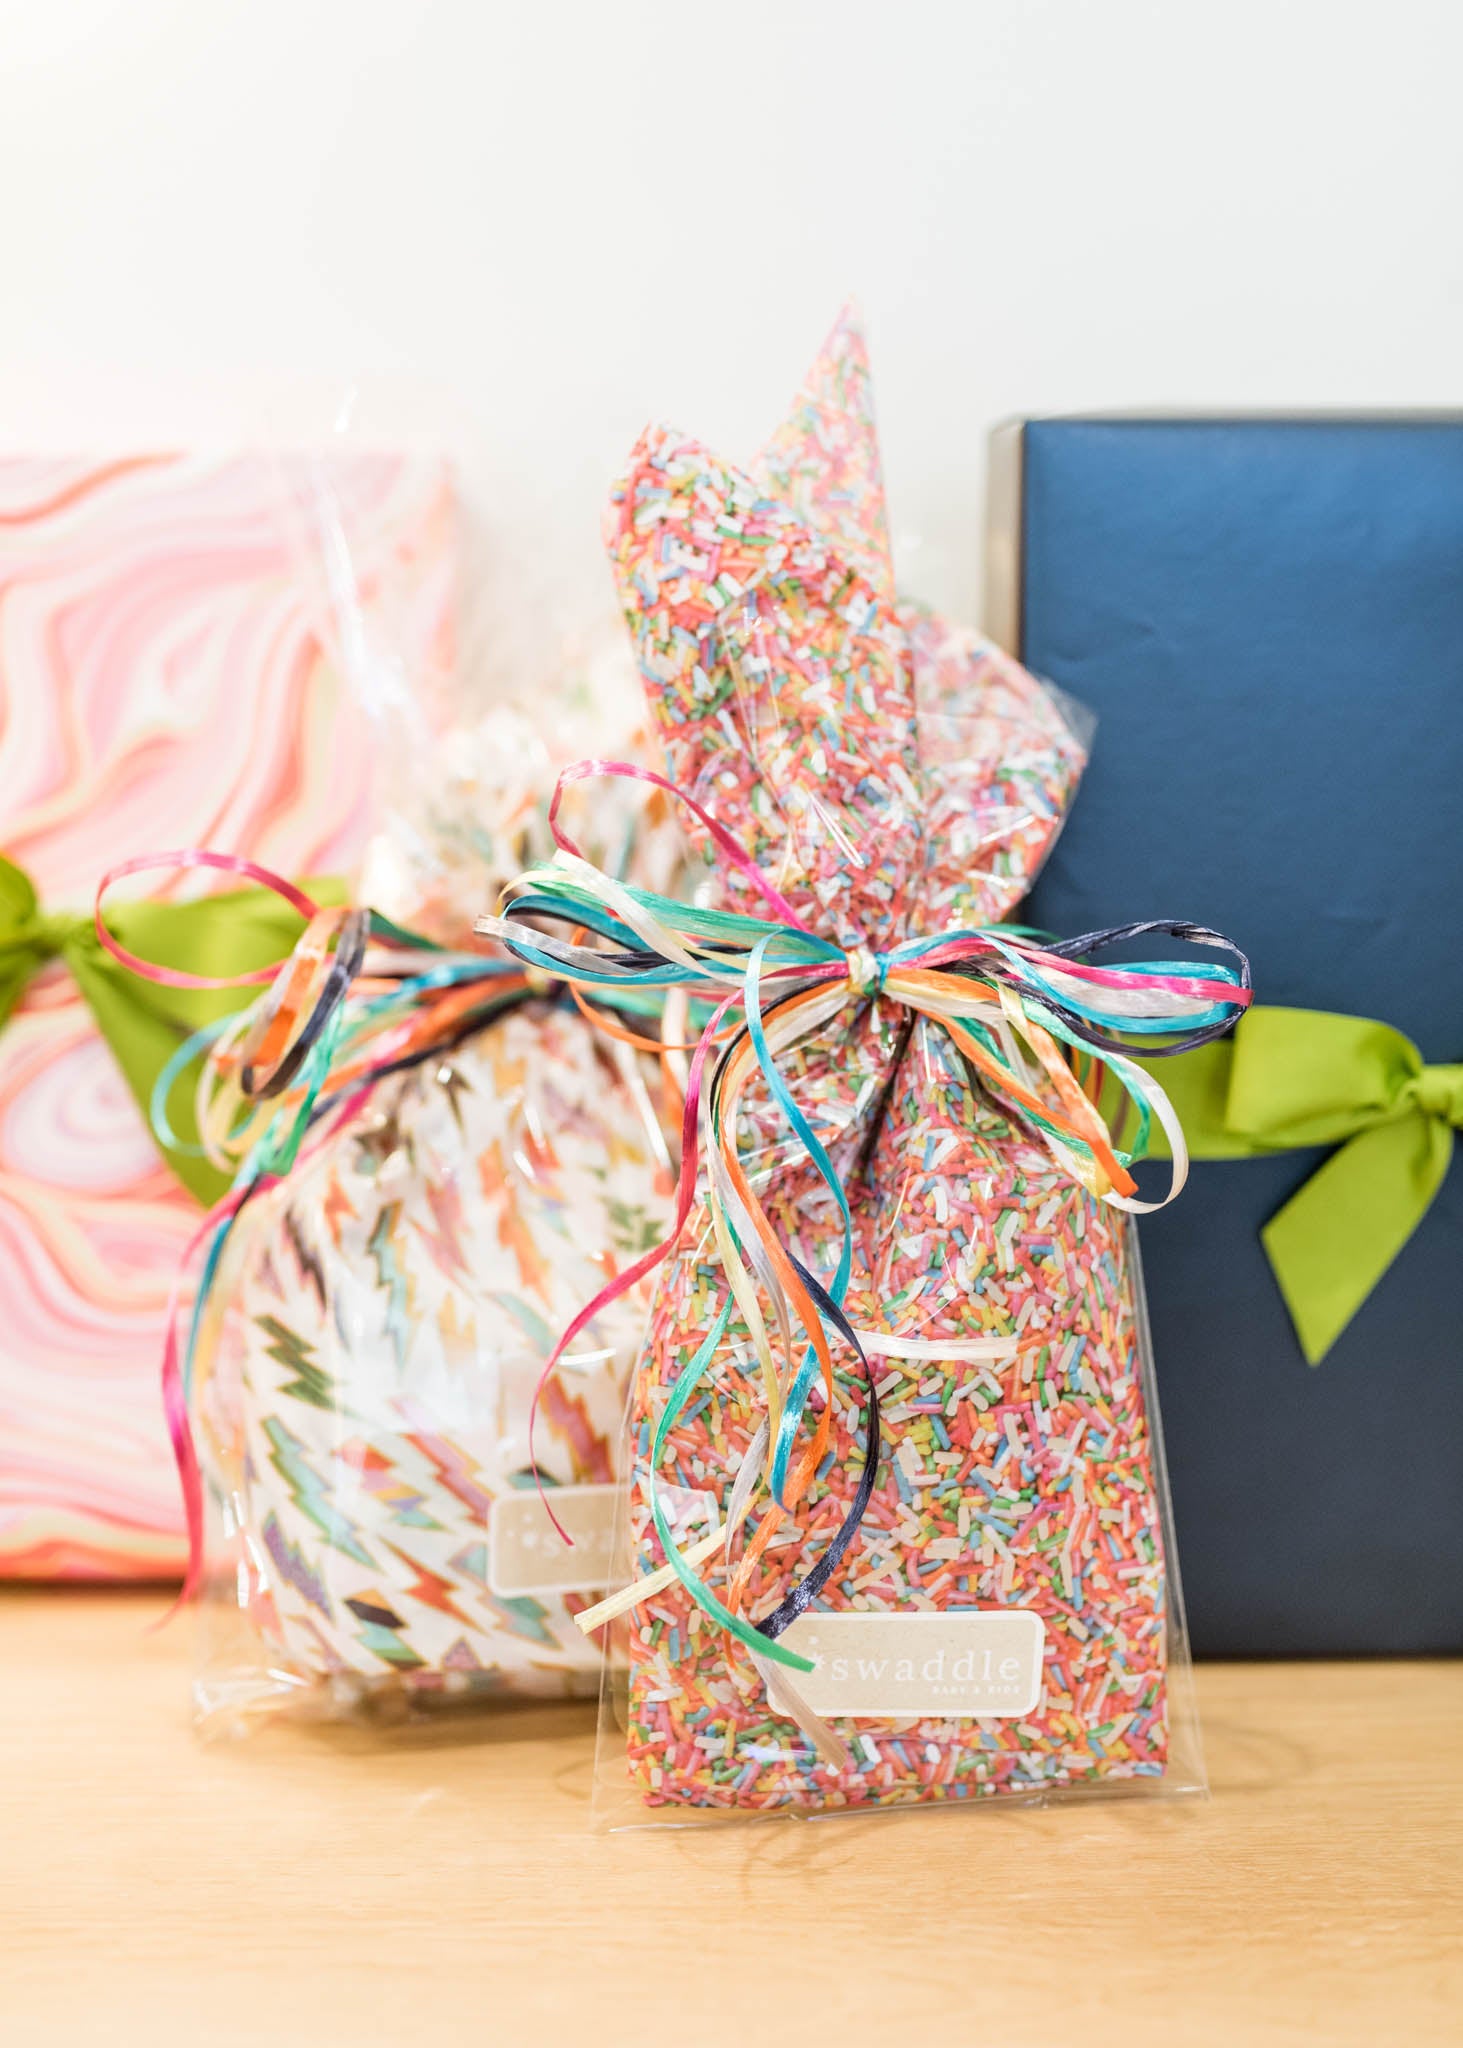 Complimentary Gift Wrapping